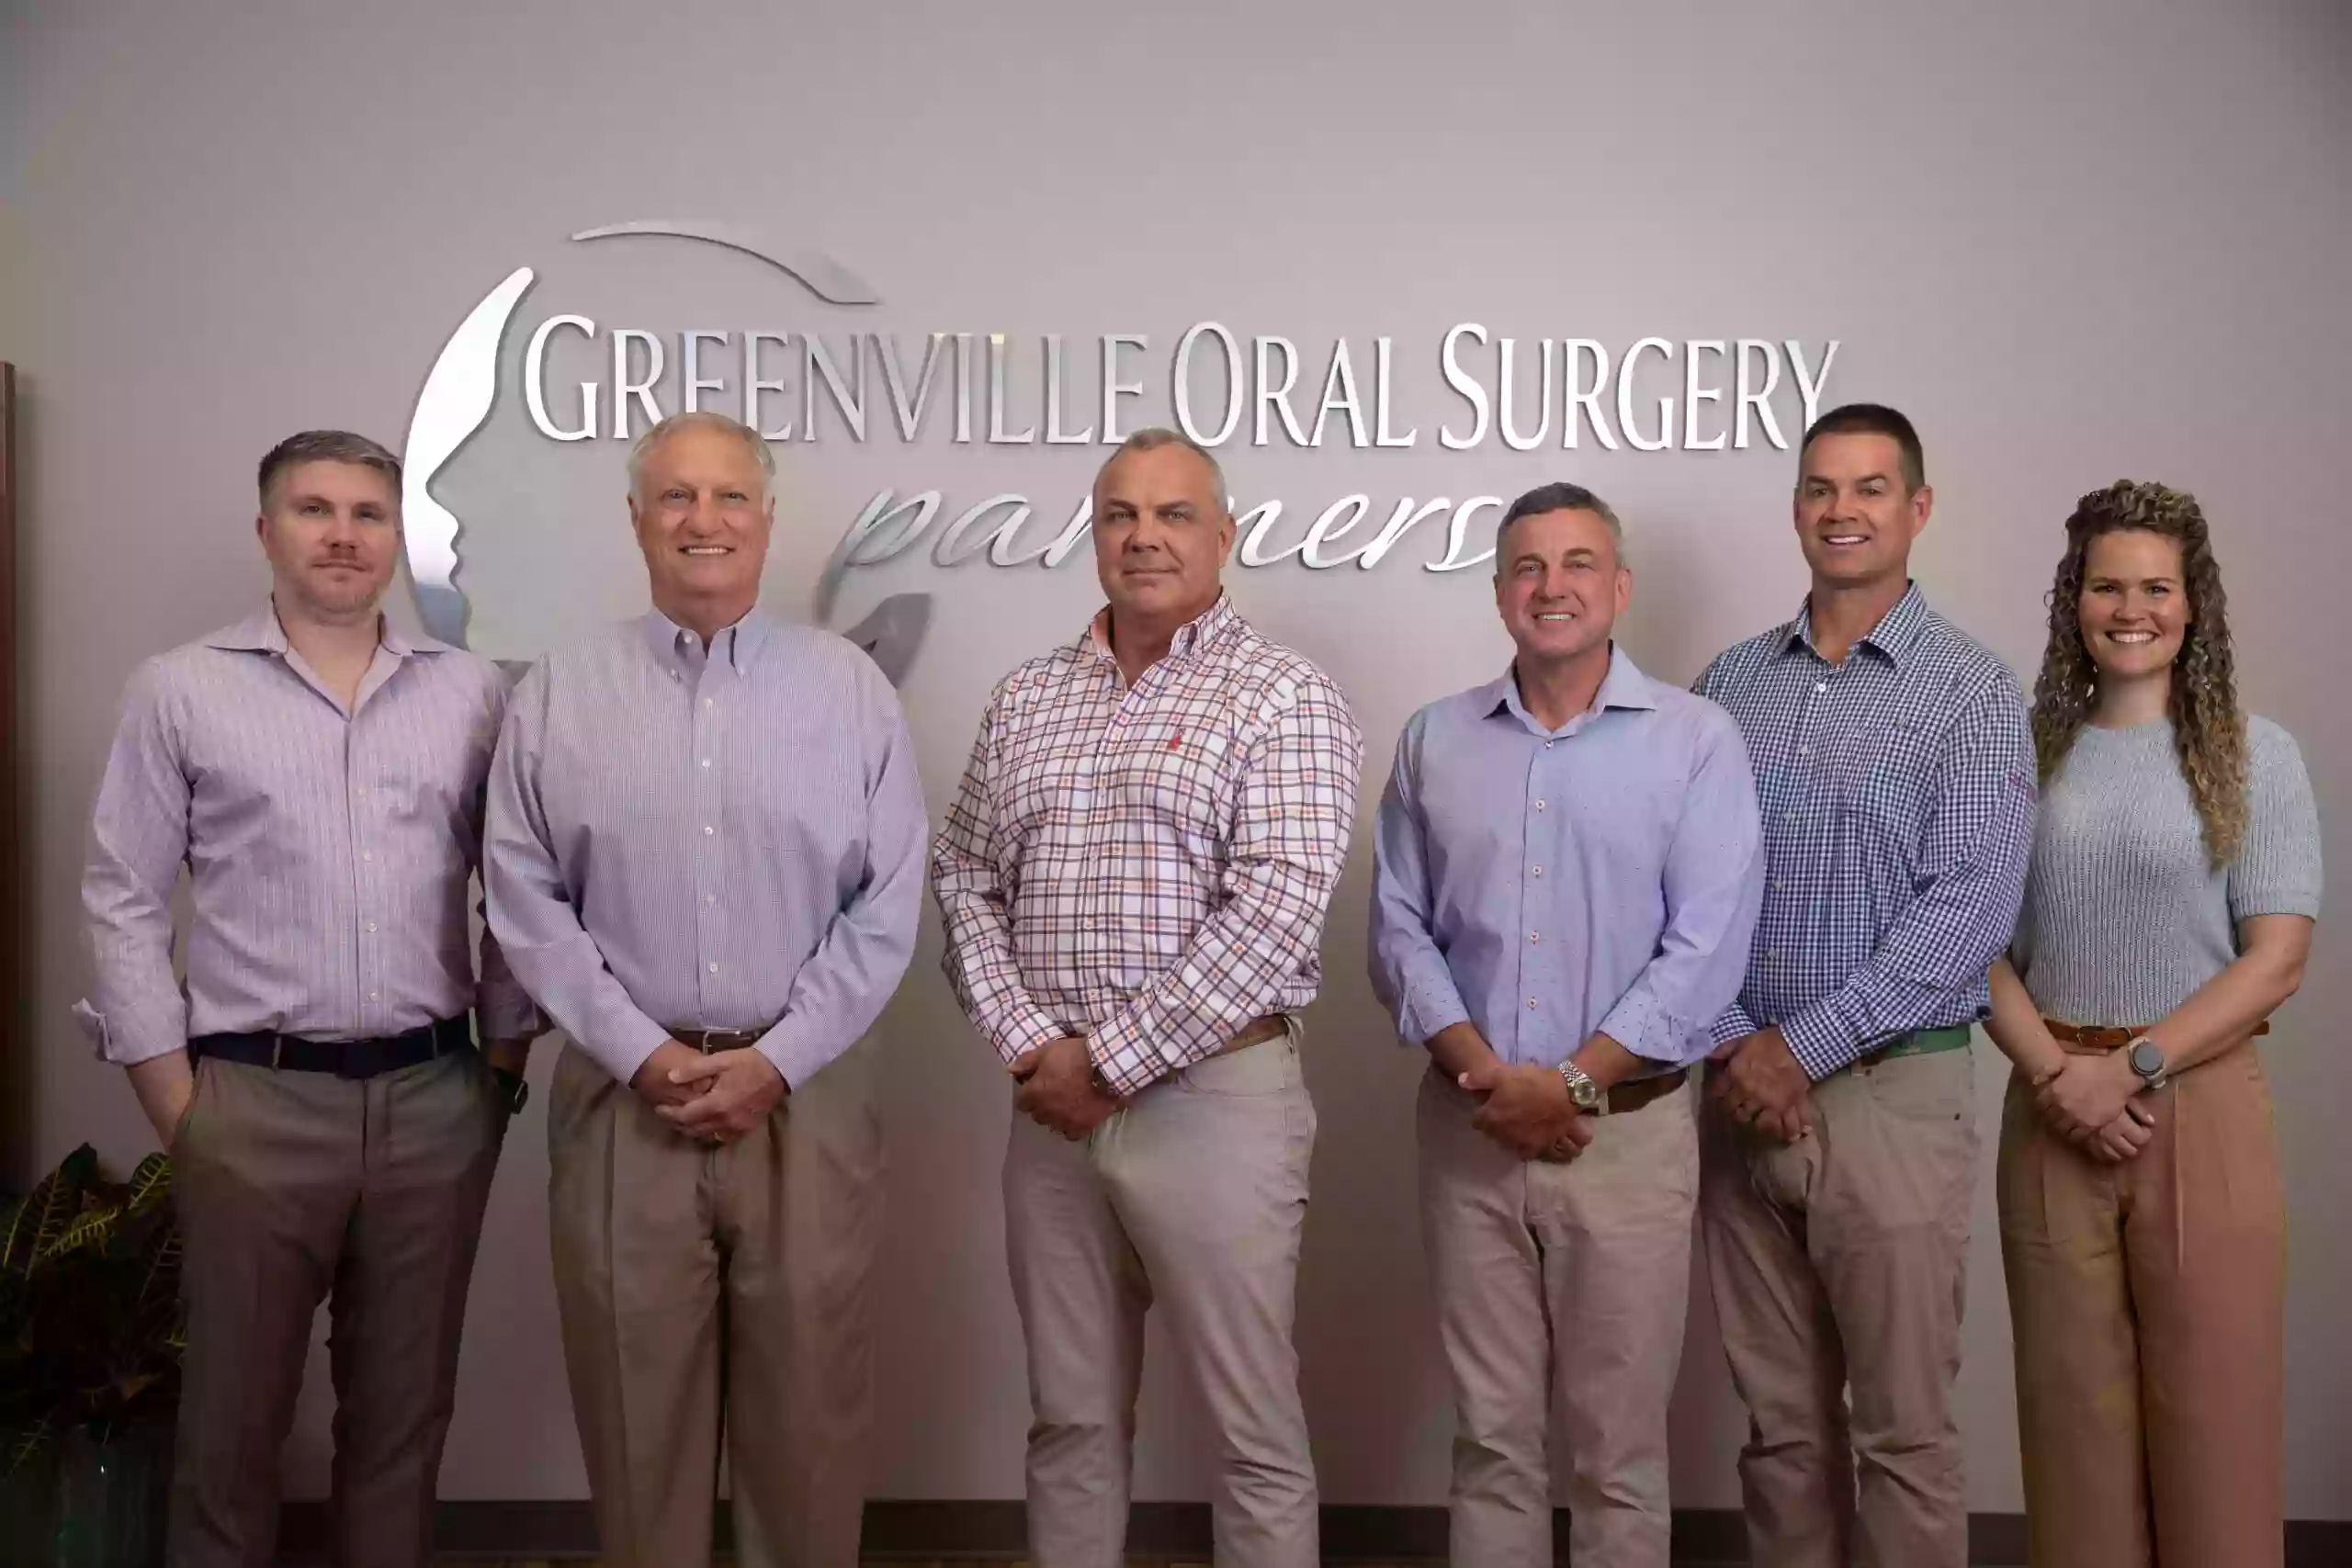 Greenville Oral Surgery Partners